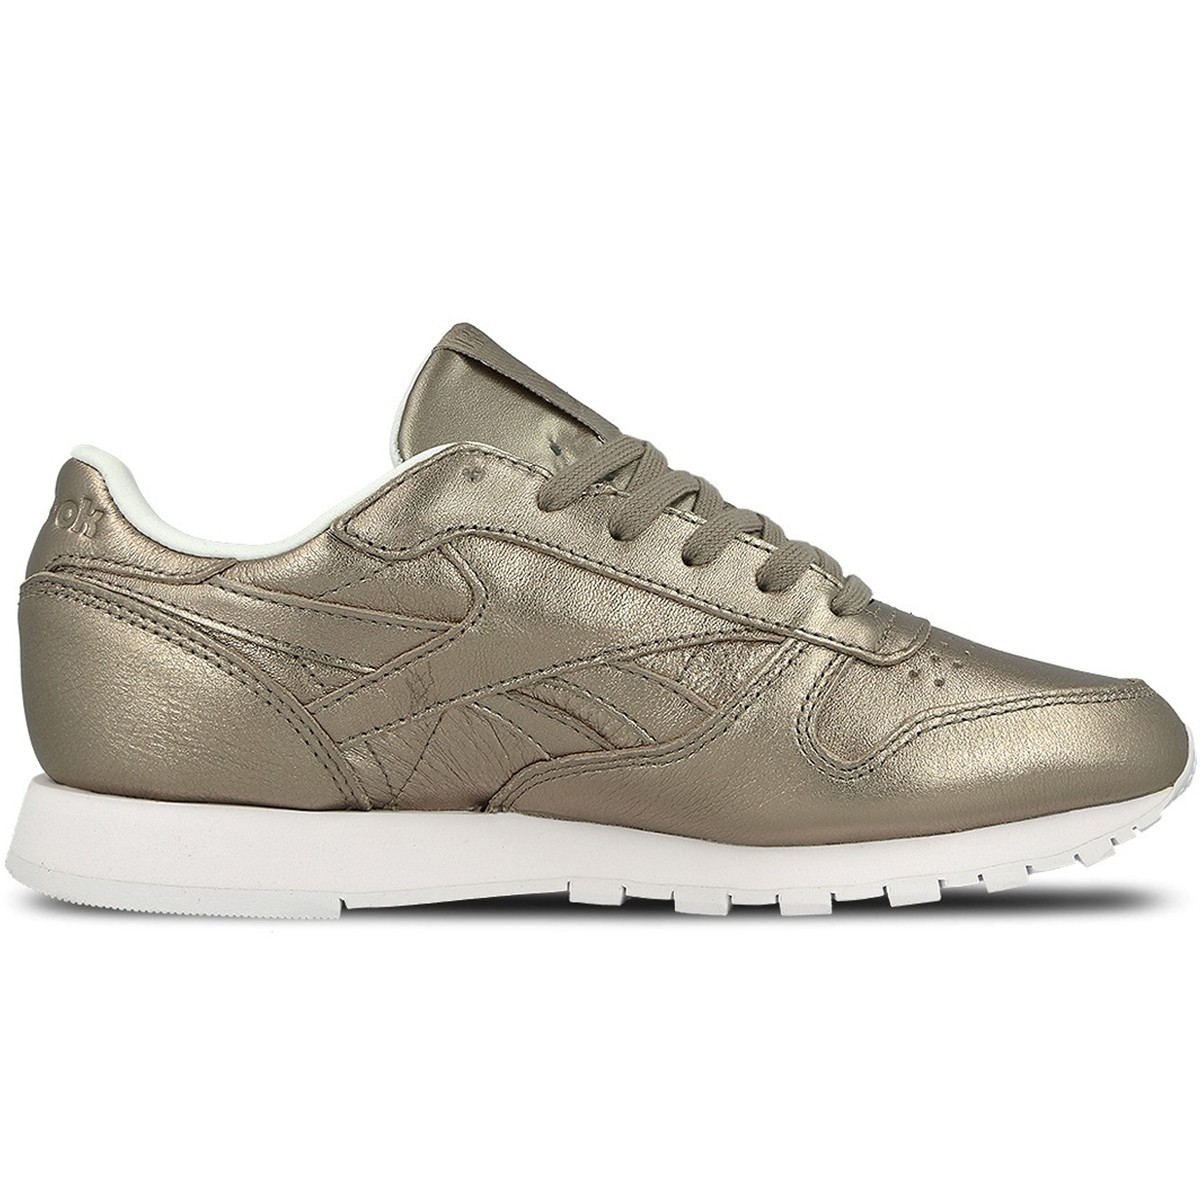 Reebok Classic Leather Melted Metal 